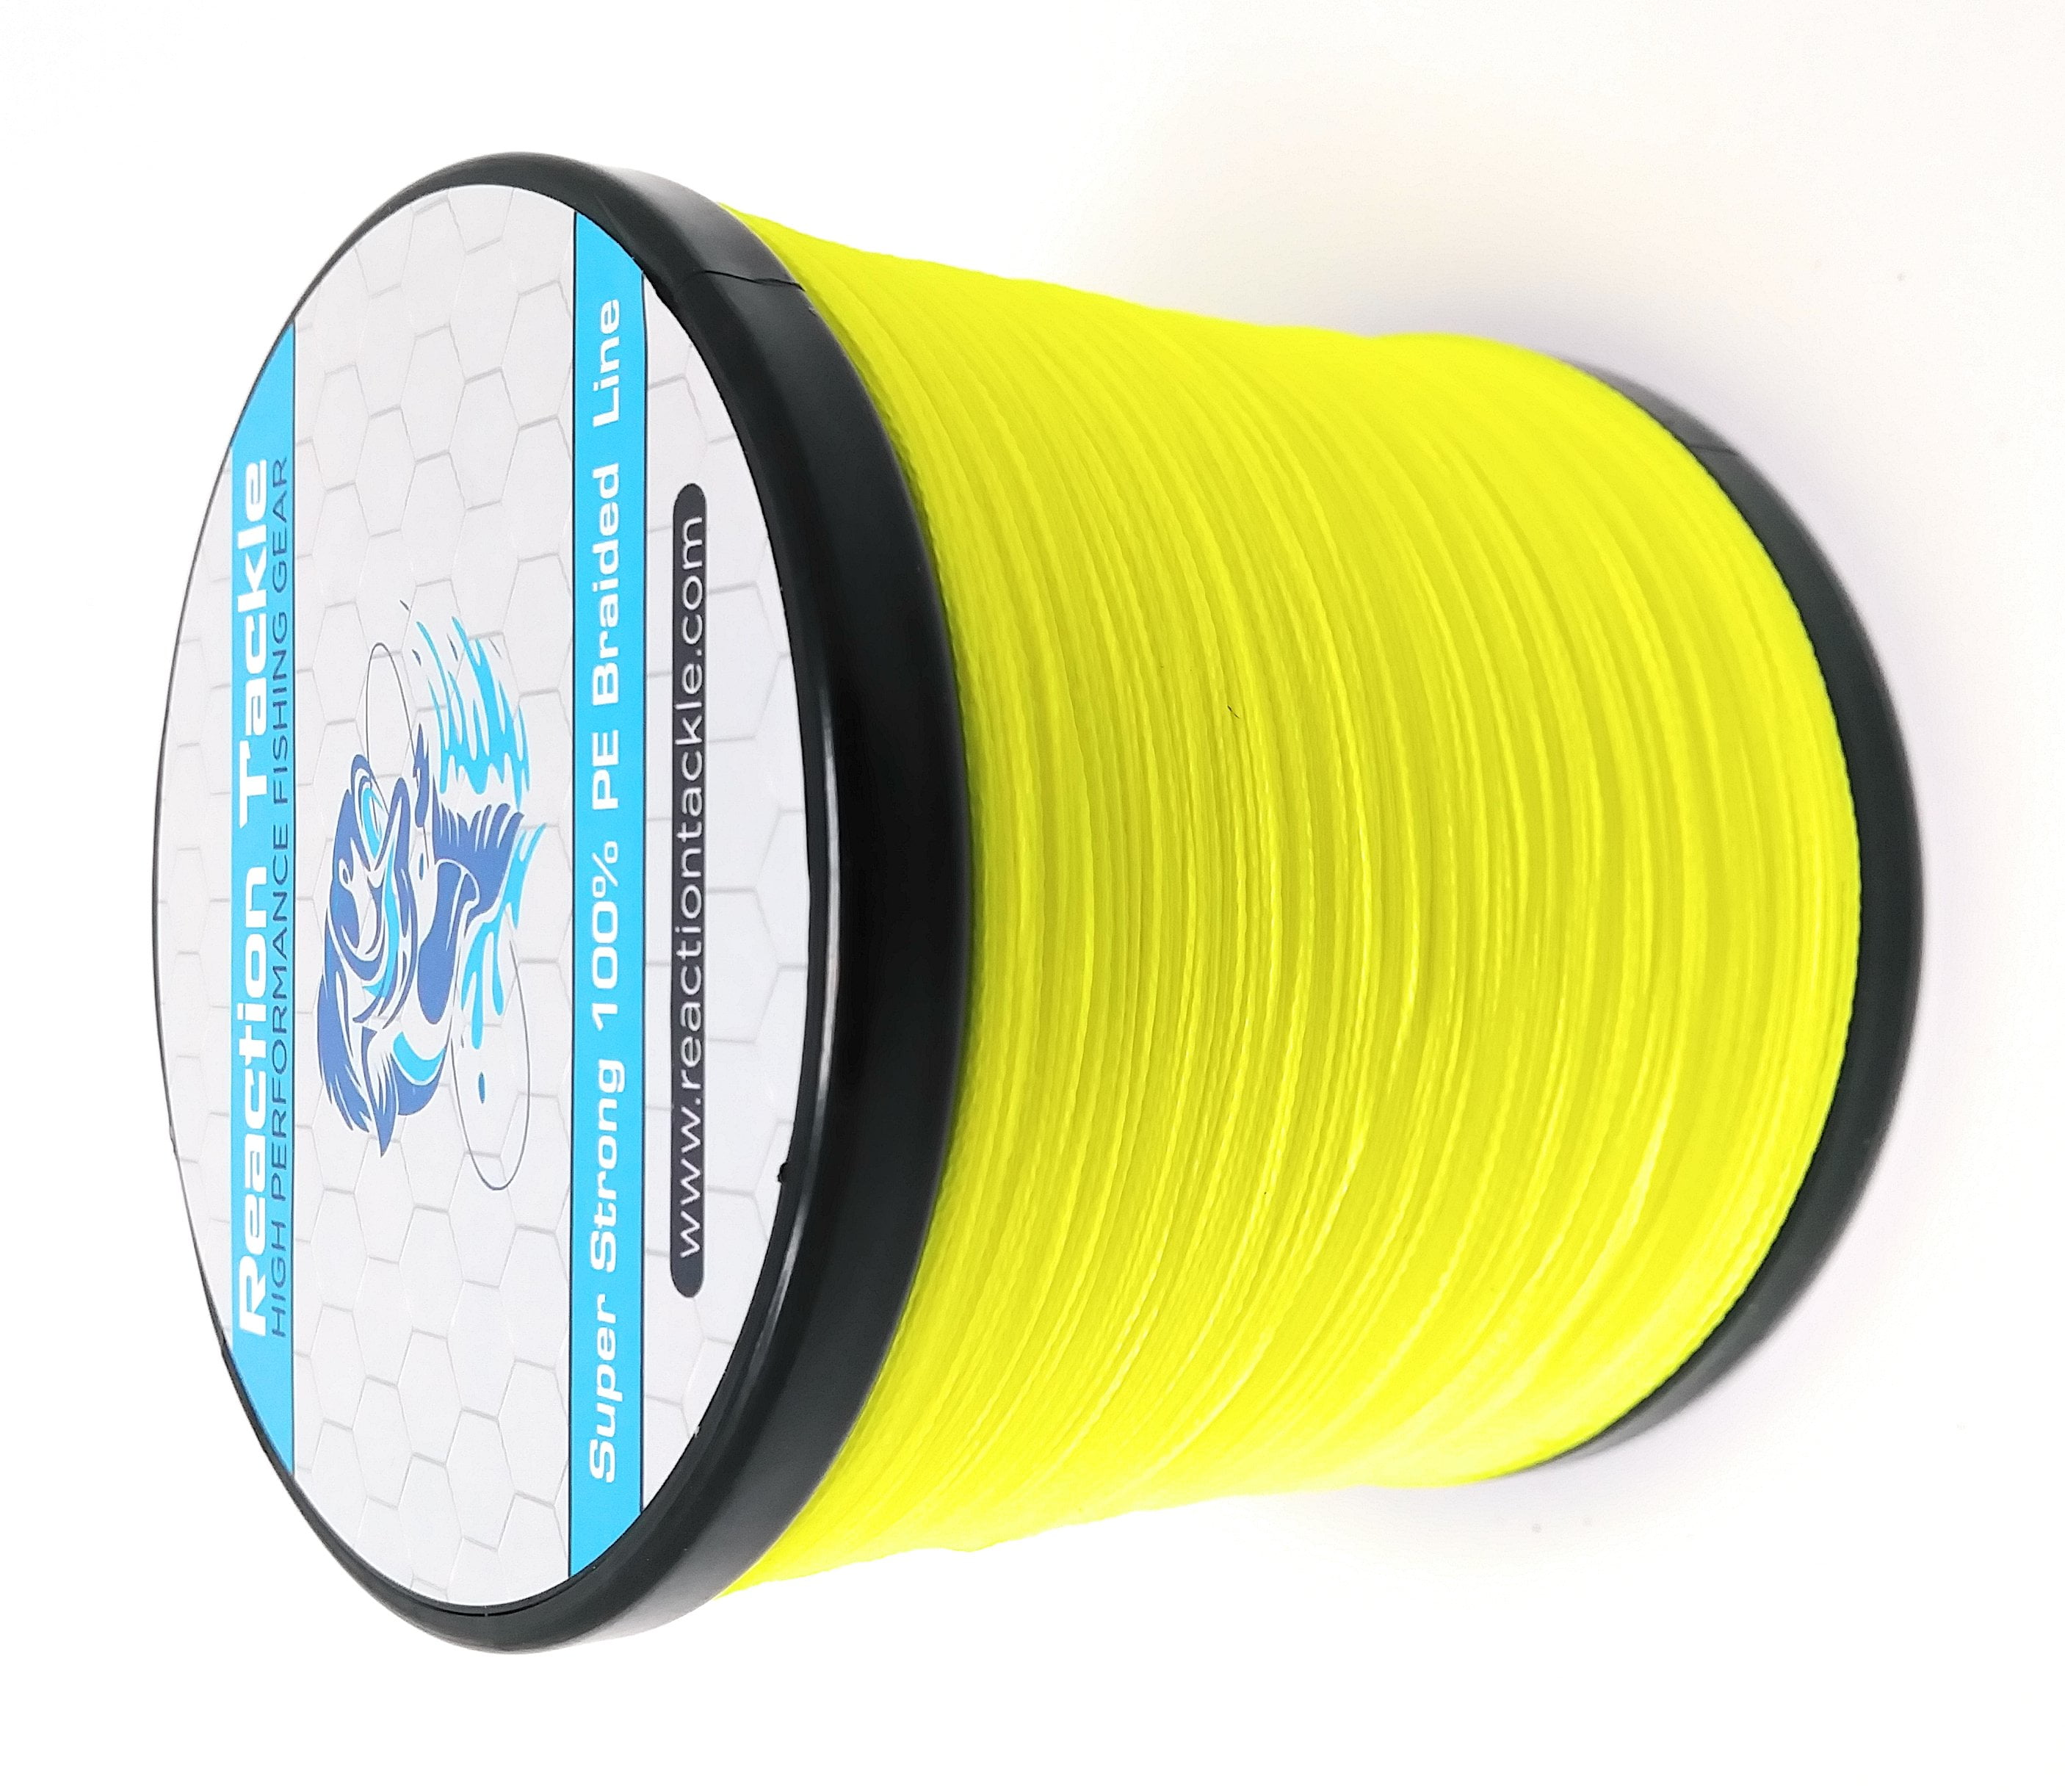 Reaction Tackle Braided Fishing Line- NO FADE Low-Vis Green